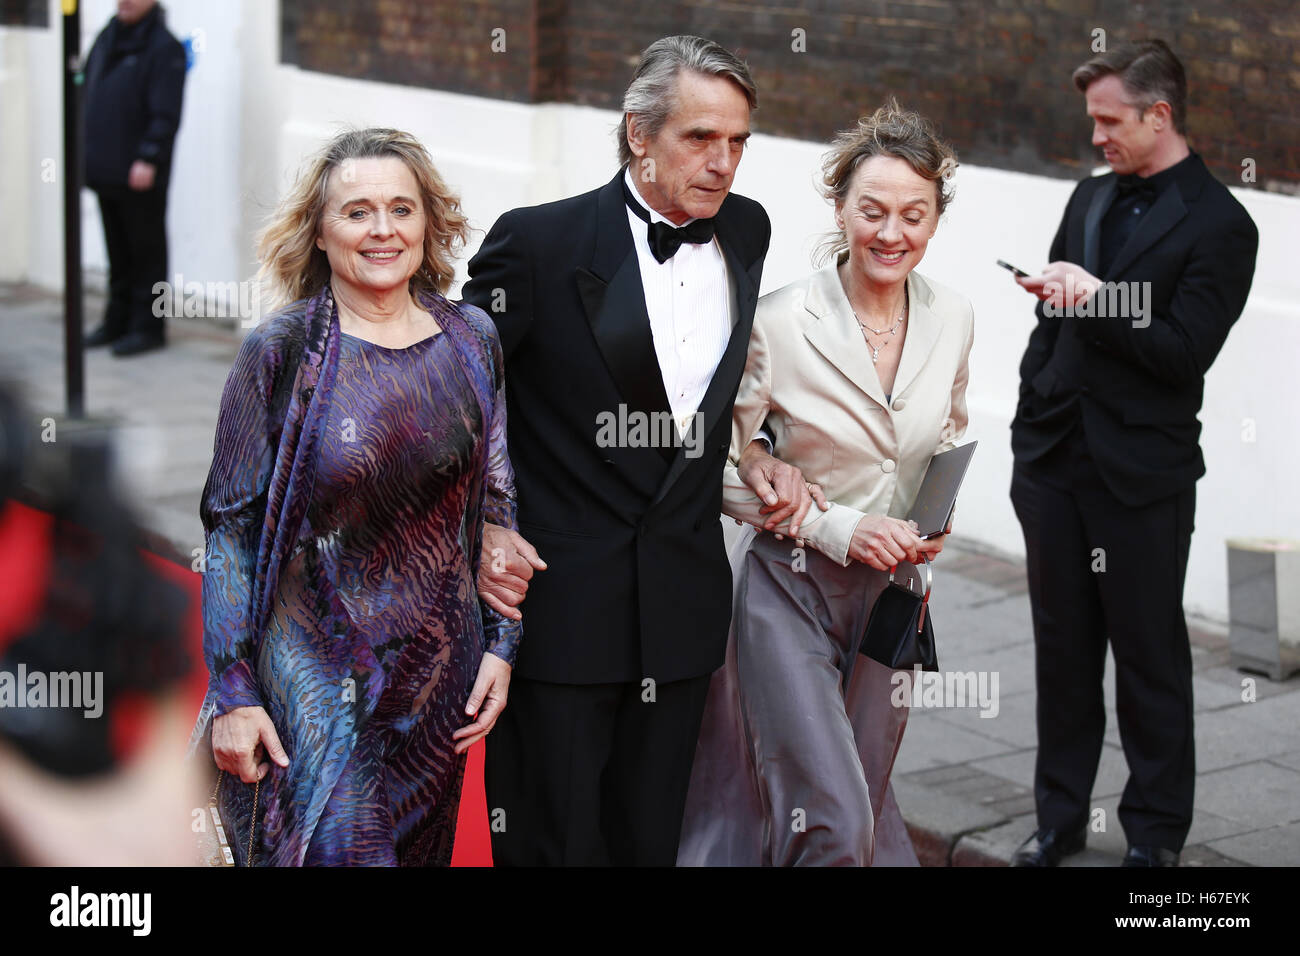 Sinead Cusack, Jeremy Irons und Niamh Cusack Ankunft besucht A Gala-Feier in The Old Vic Theater auf 19. April 2015. London. Stockfoto